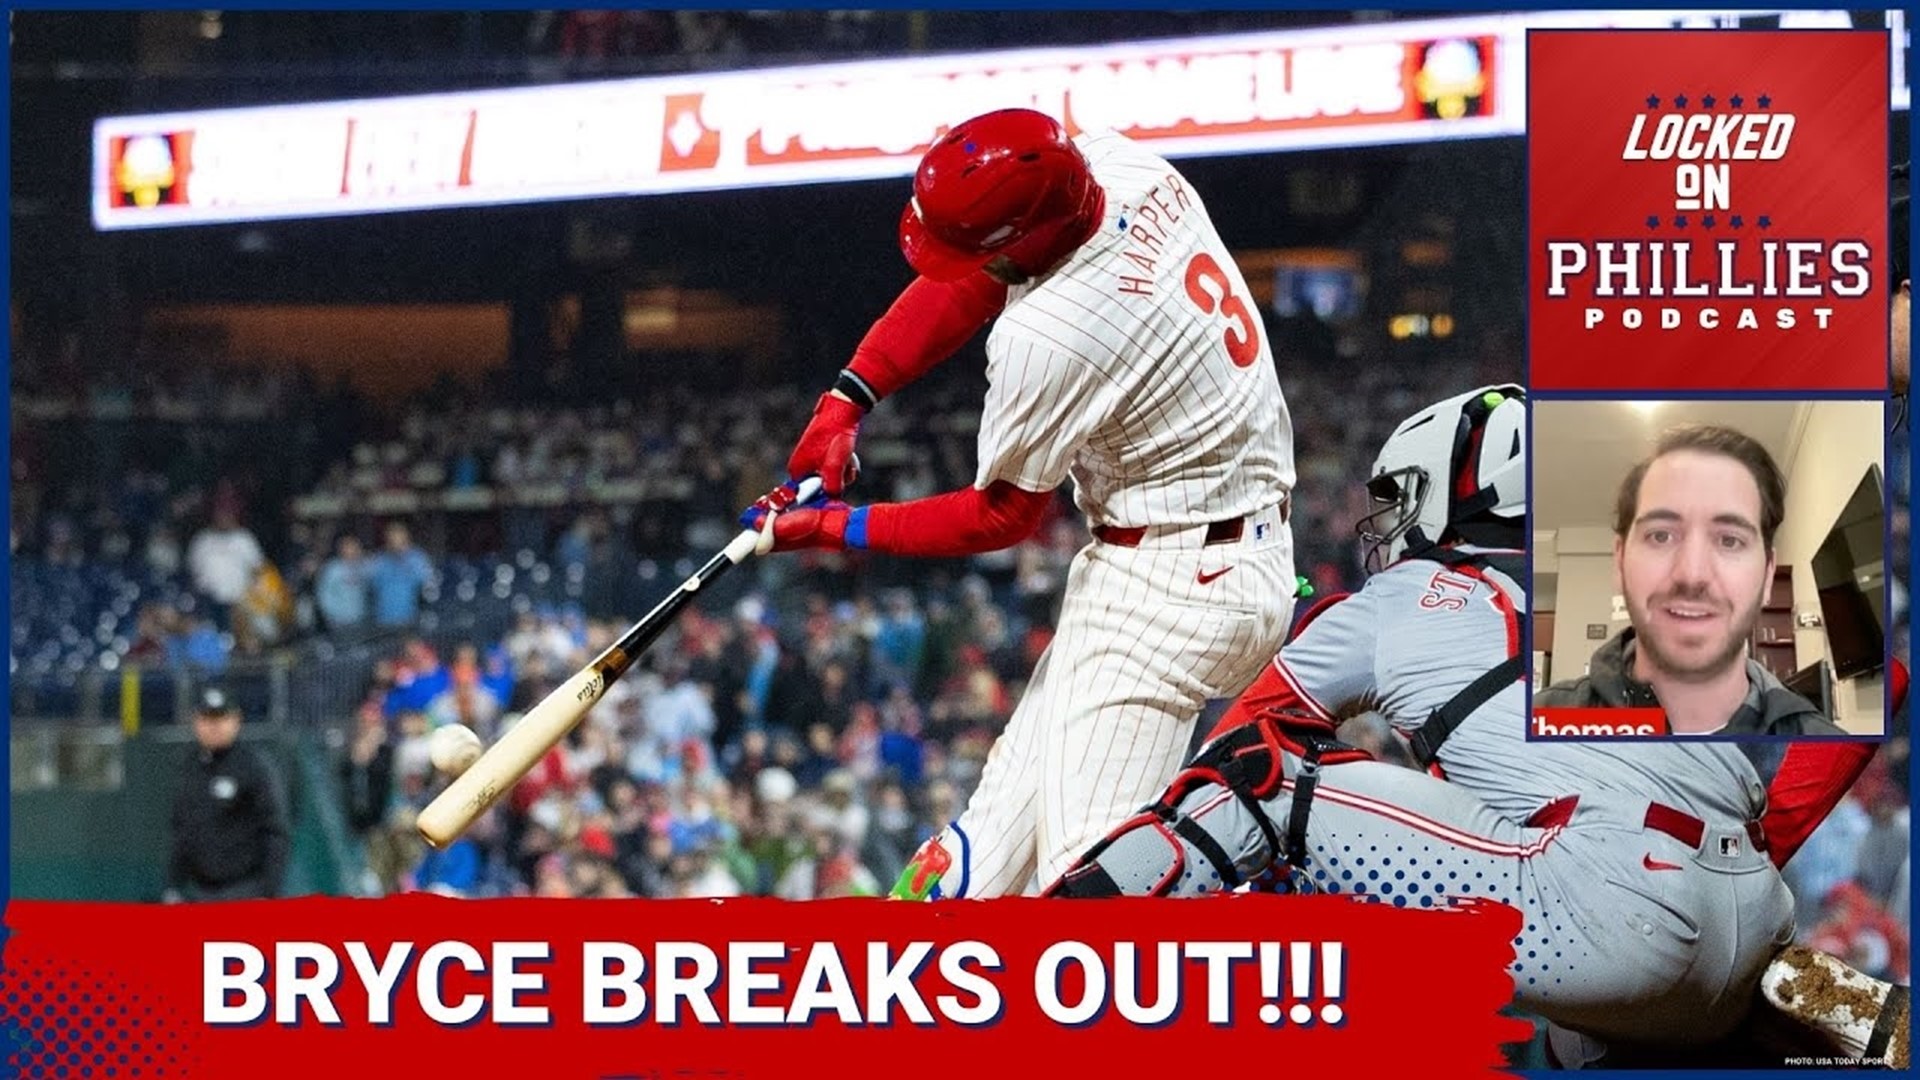 In today's episode, Connor reacts to Bryce Harper's MONSTER night at the plate for the Philadelphia Phillies.